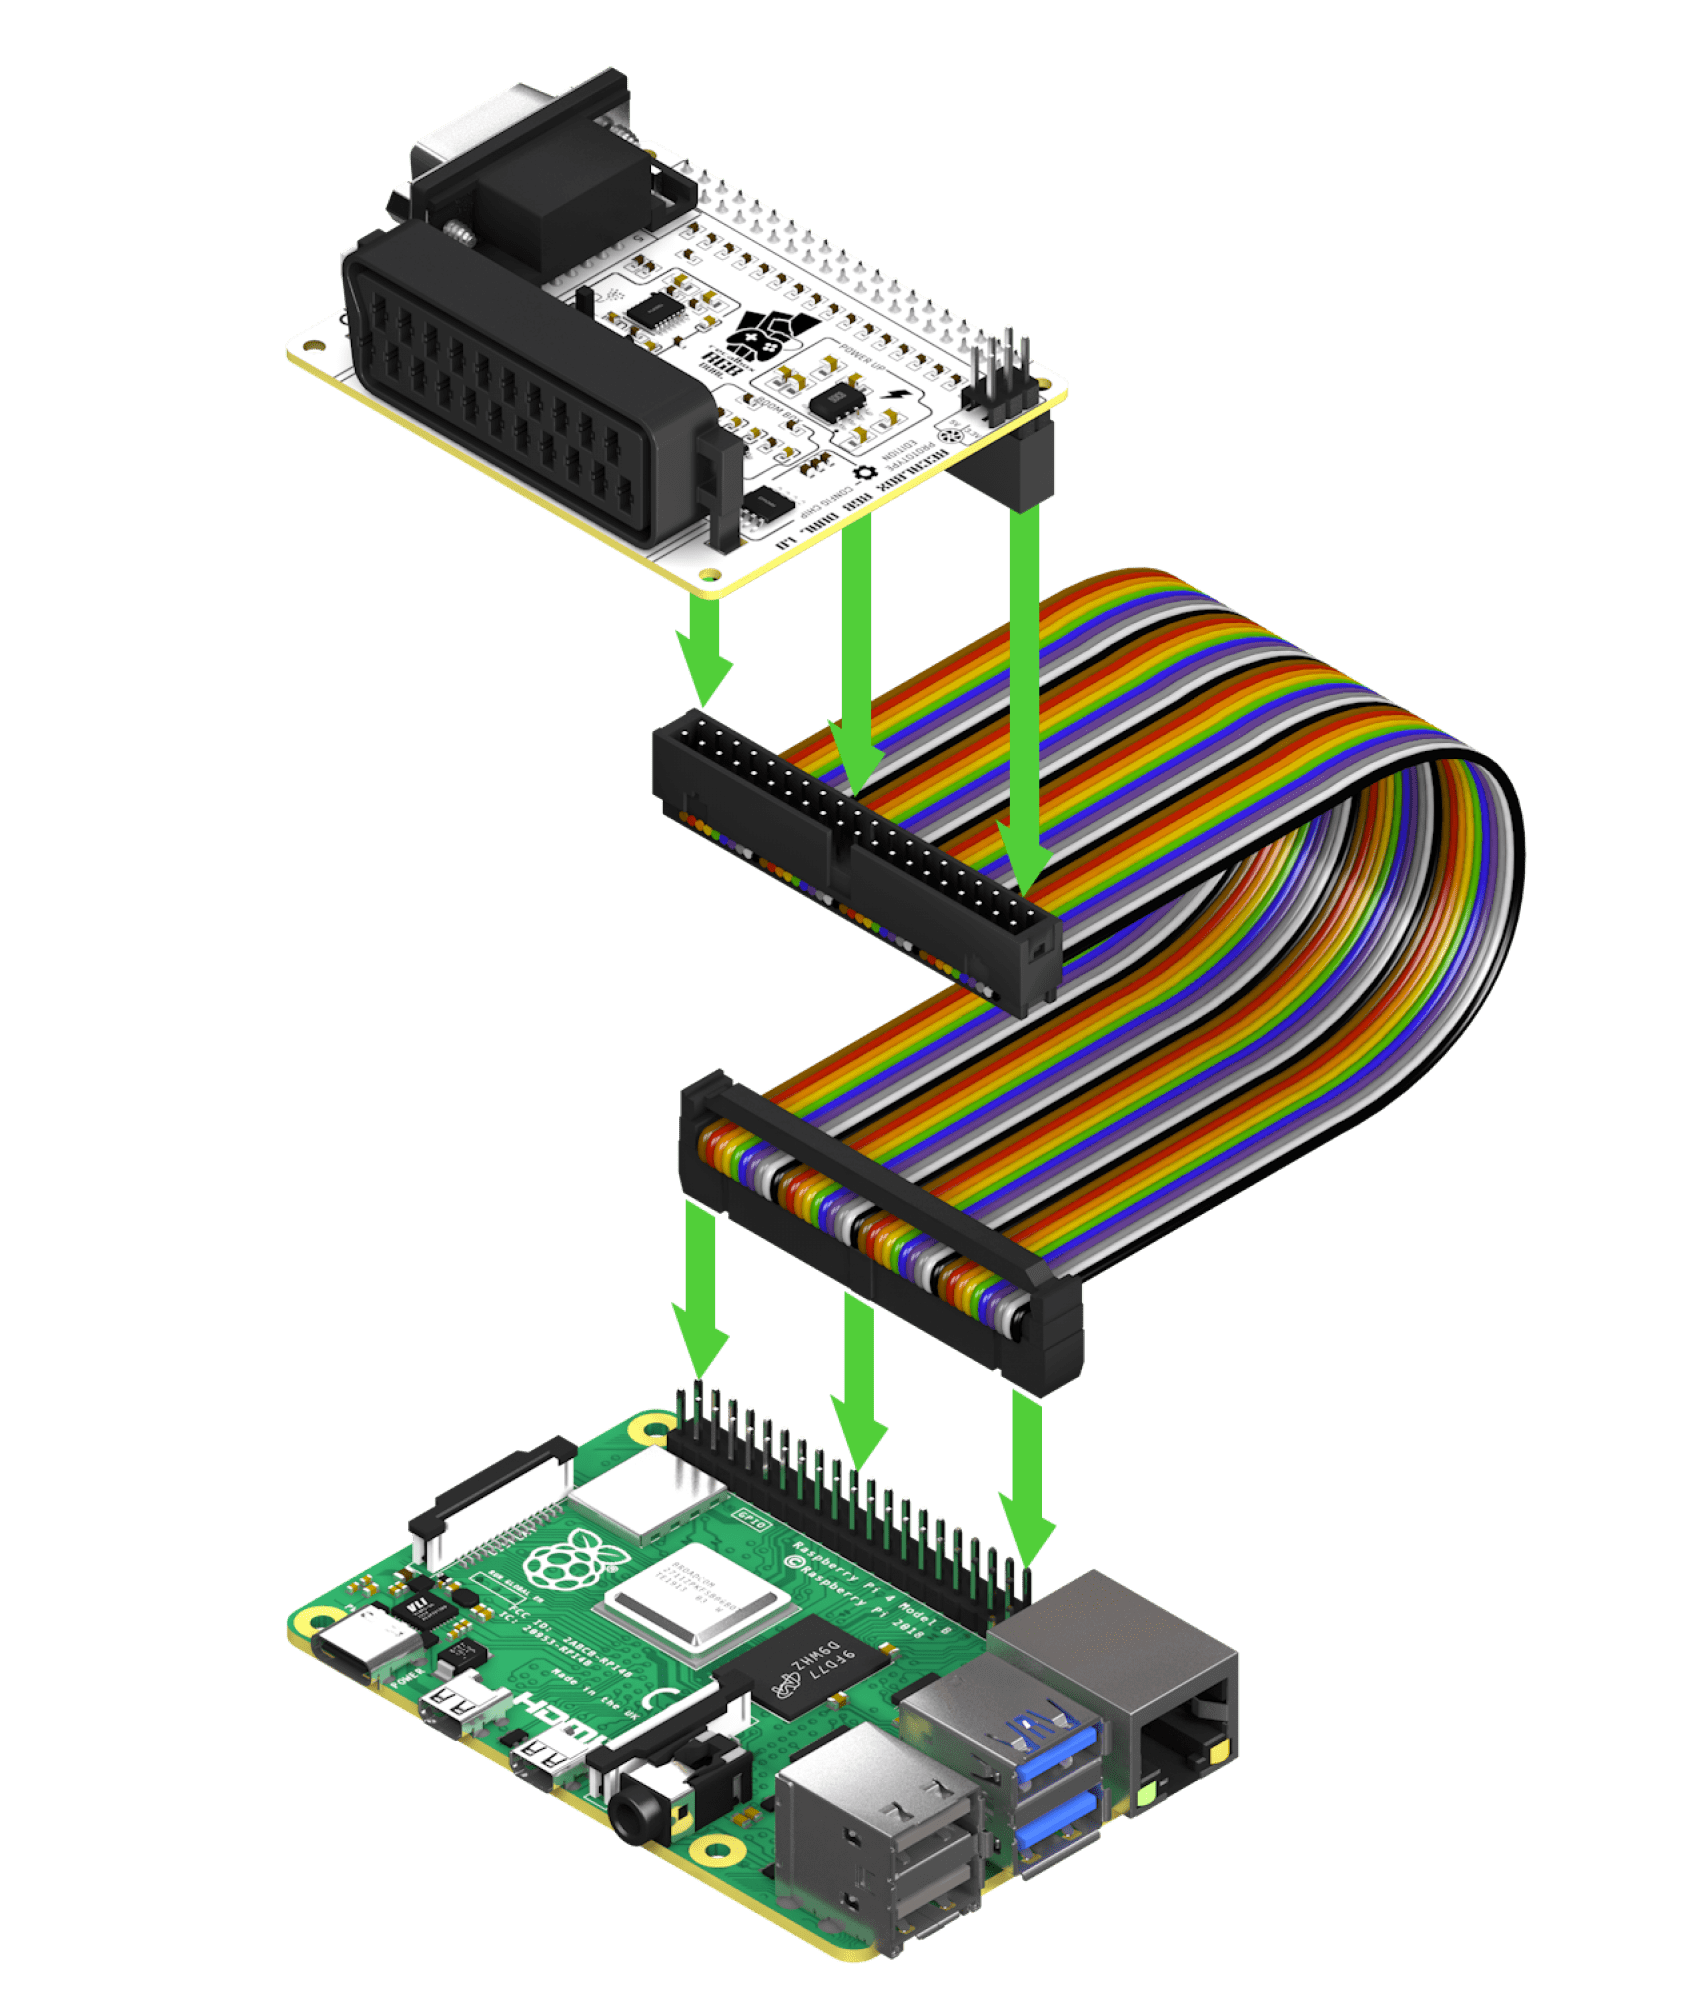 Connect with gpio extender on rpi 4